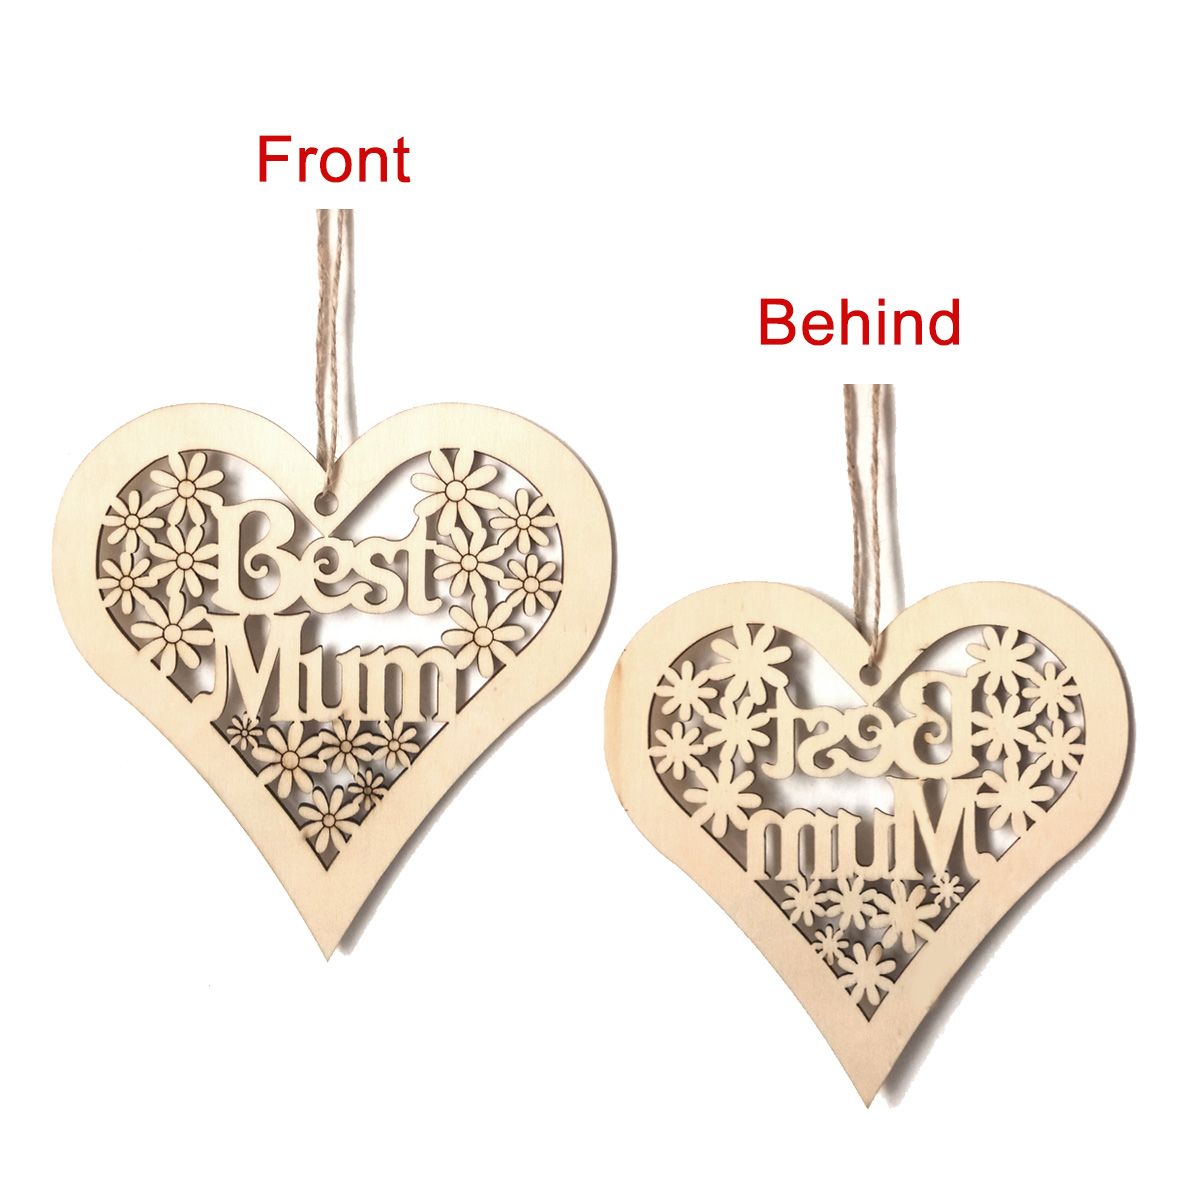 10cm-Wooden-Plaque-Mum-Heart-Shape-Flowers-Mothers-Day-Hanging-Decorations-Craft-Gift-1464275